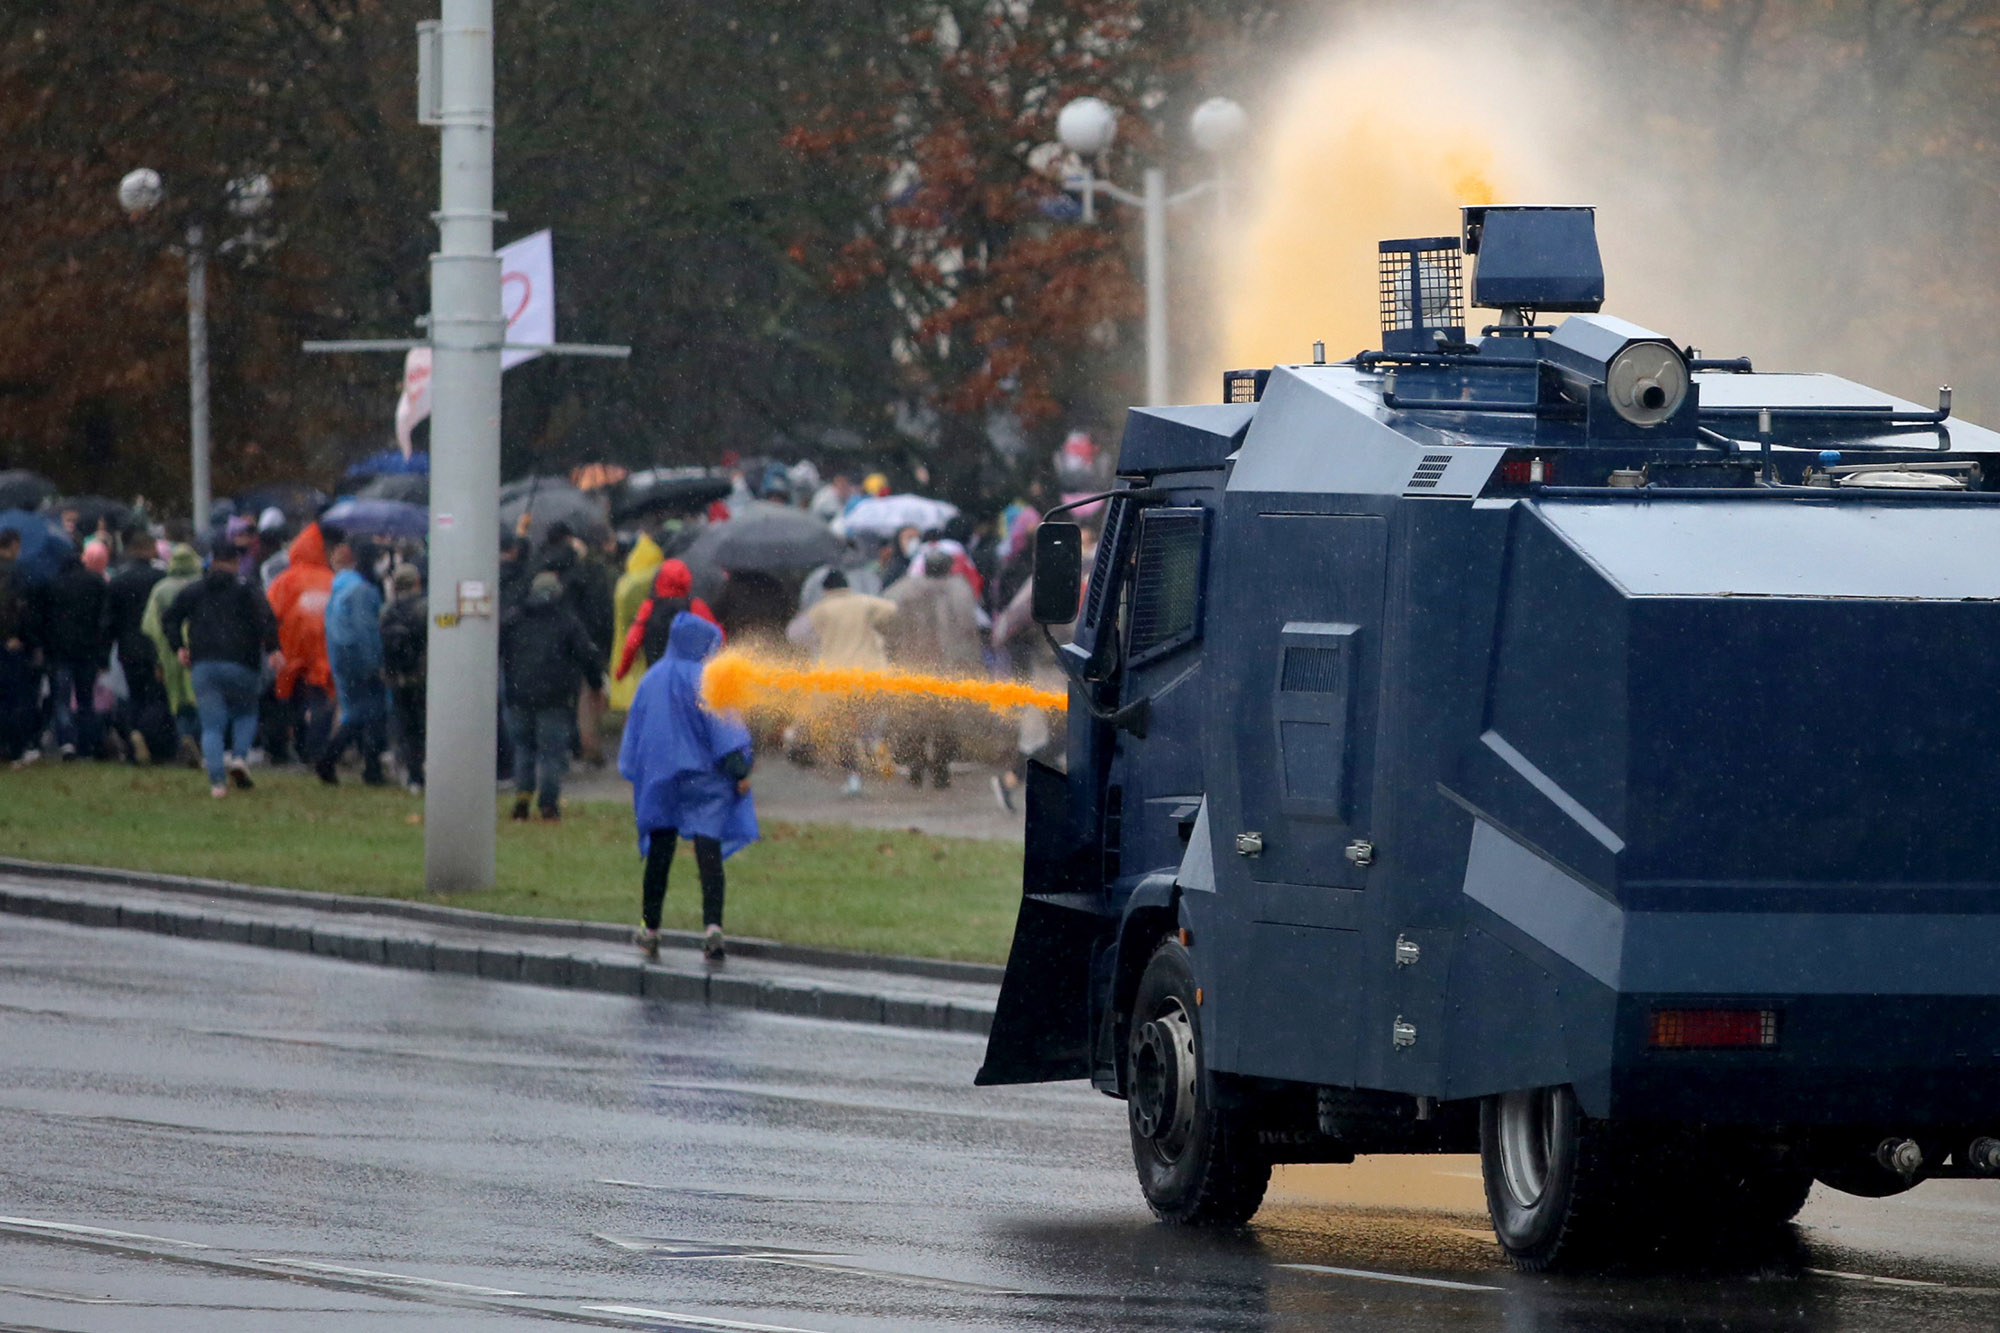 Police use&nbsp;water cannon to disperse demonstrators during a rally&nbsp;in Minsk on Oct.&nbsp;11.